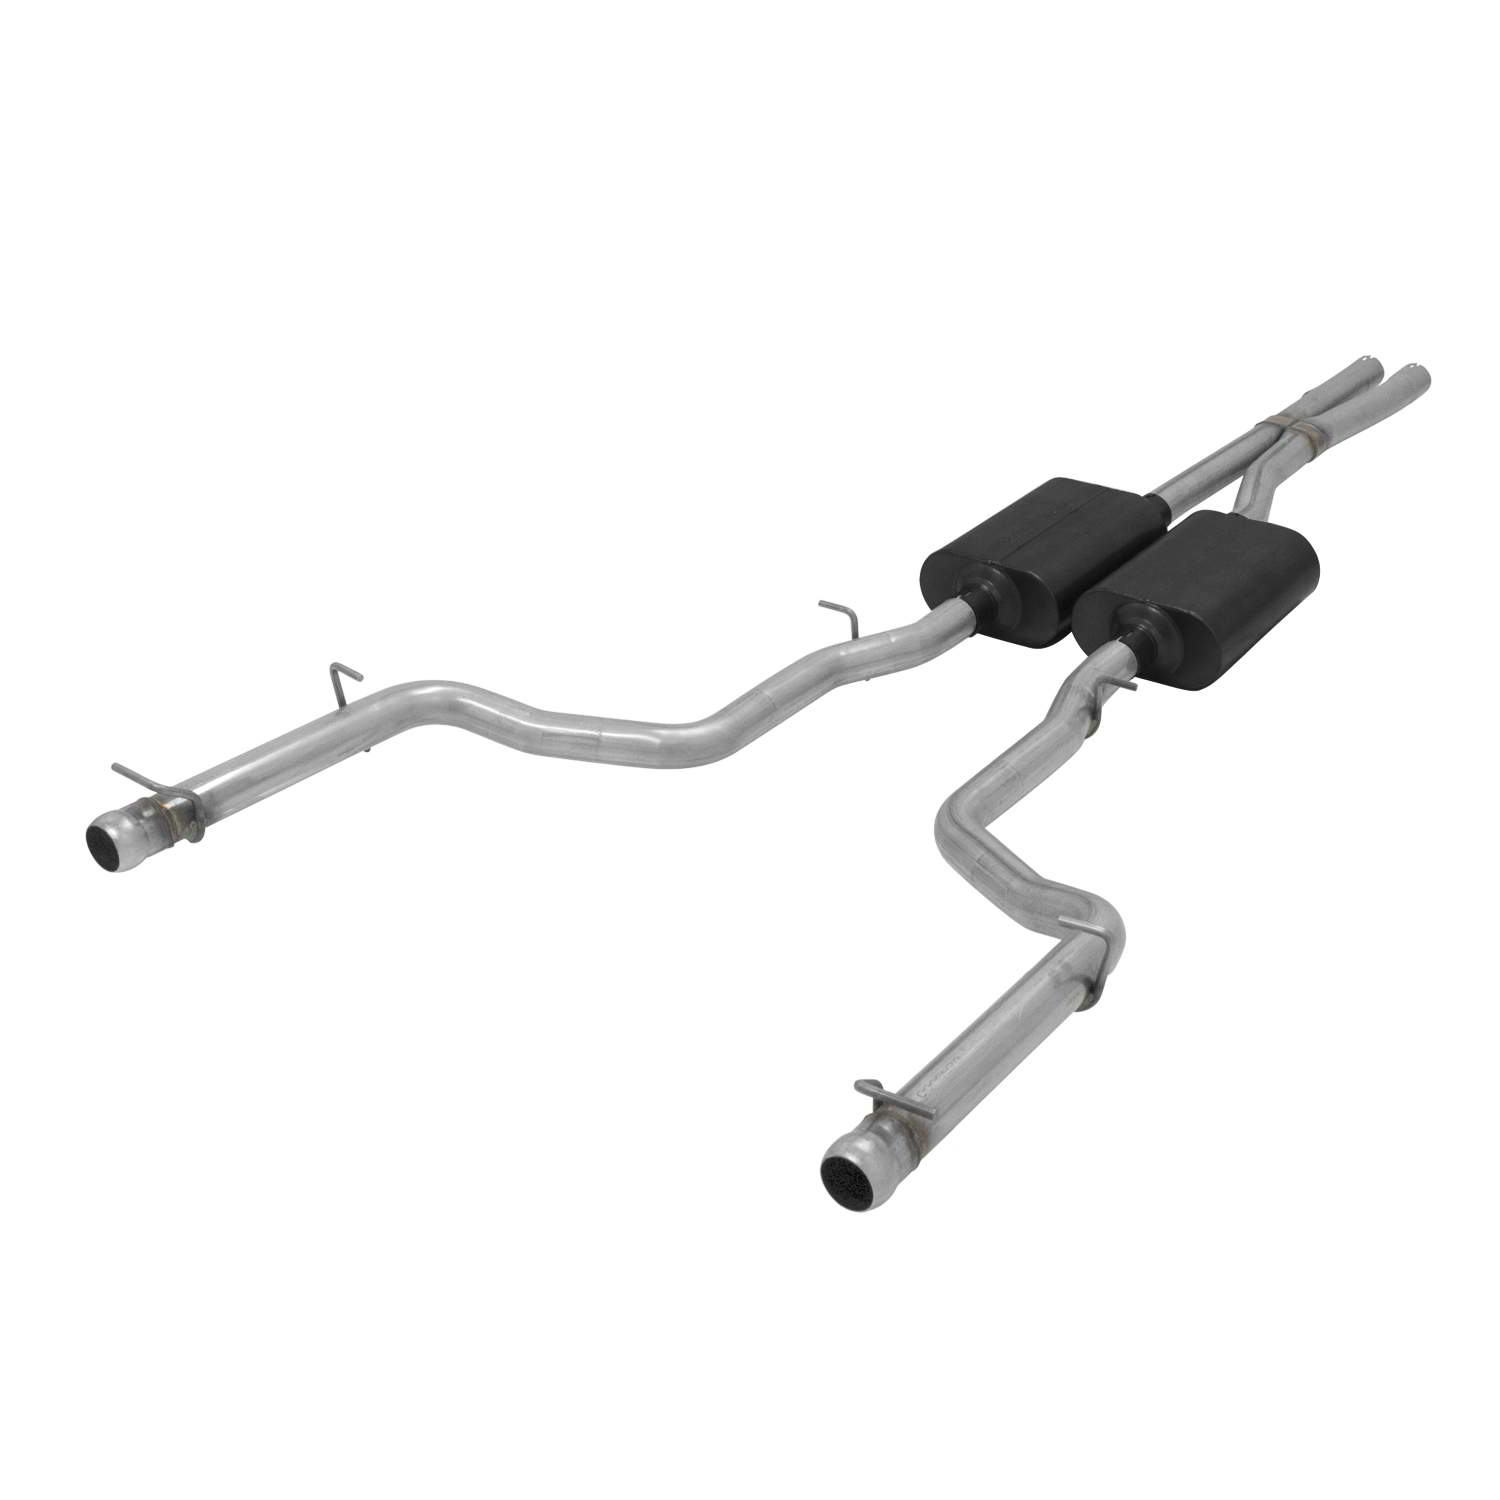 2015-2016 Dodge Challenger R/T 5.7L Flowmaster 409S American Thunder Catback Exhaust System